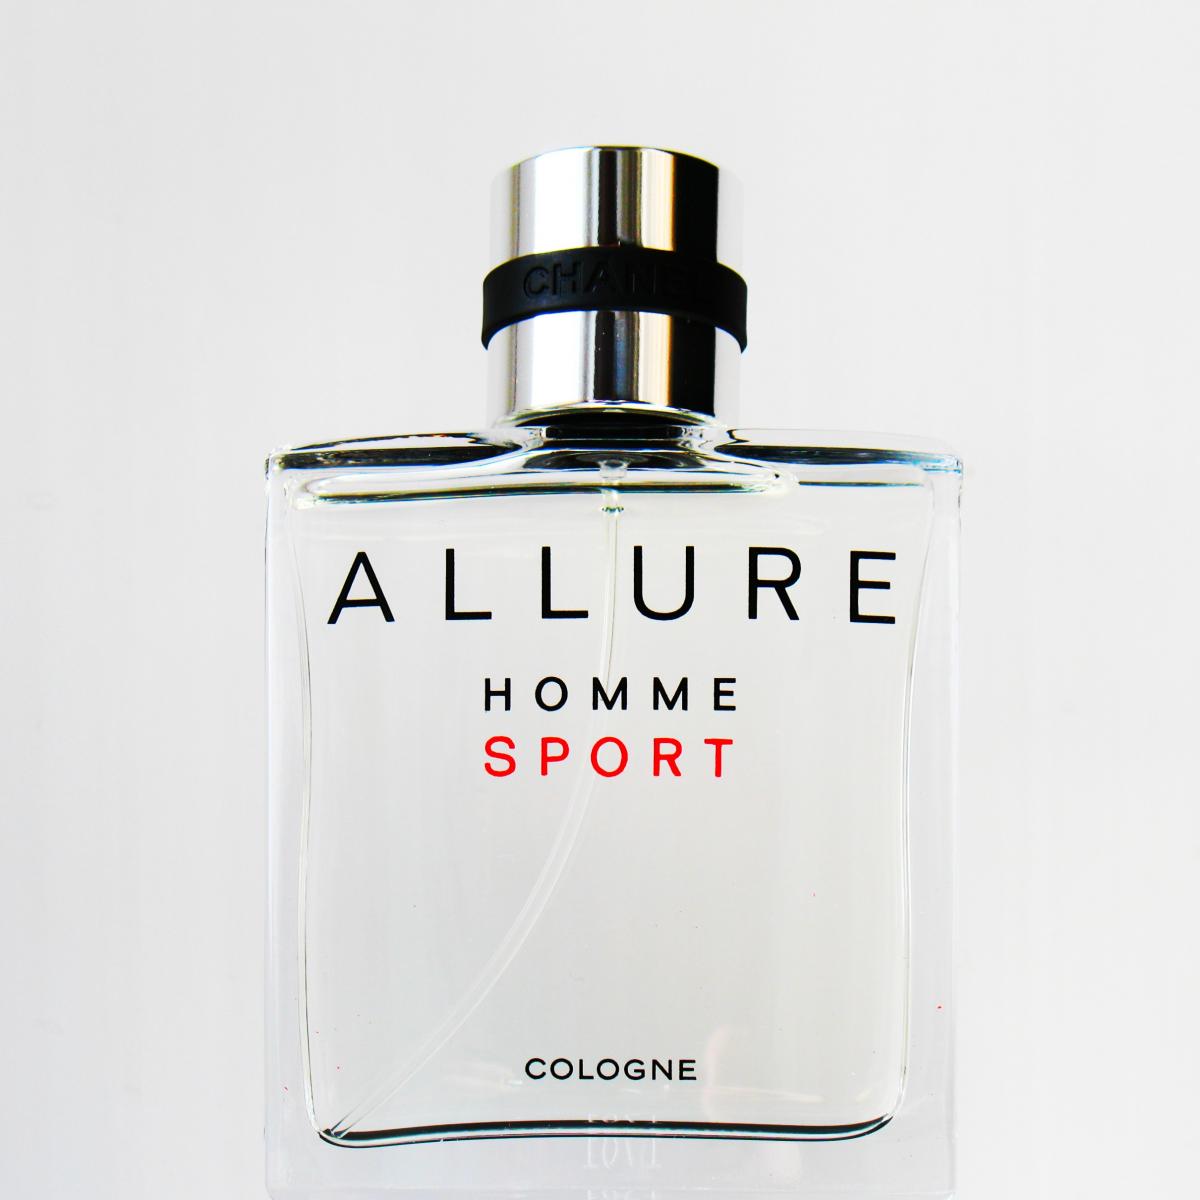 Allure sport cologne. Chanel homme Sport Cologne. Chanel Allure homme Sport Cologne. Chanel Allure homme Sport Cologne 3*20. Chanel Allure Sport Cologne 50ml.